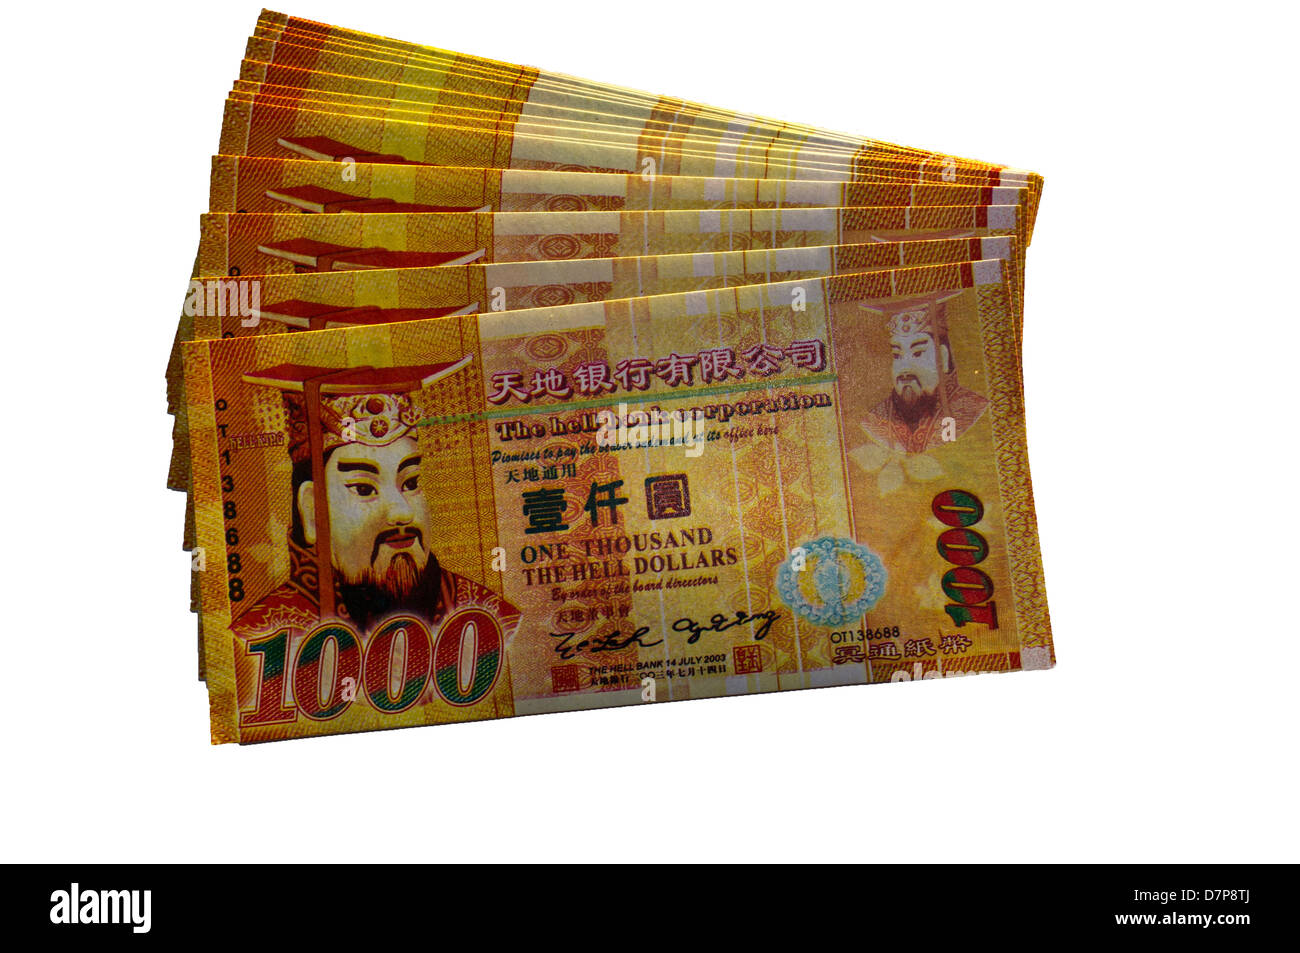 dh Fung shui MONEY ASIA China Hell bank notes chinese joss paper money Stock Photo